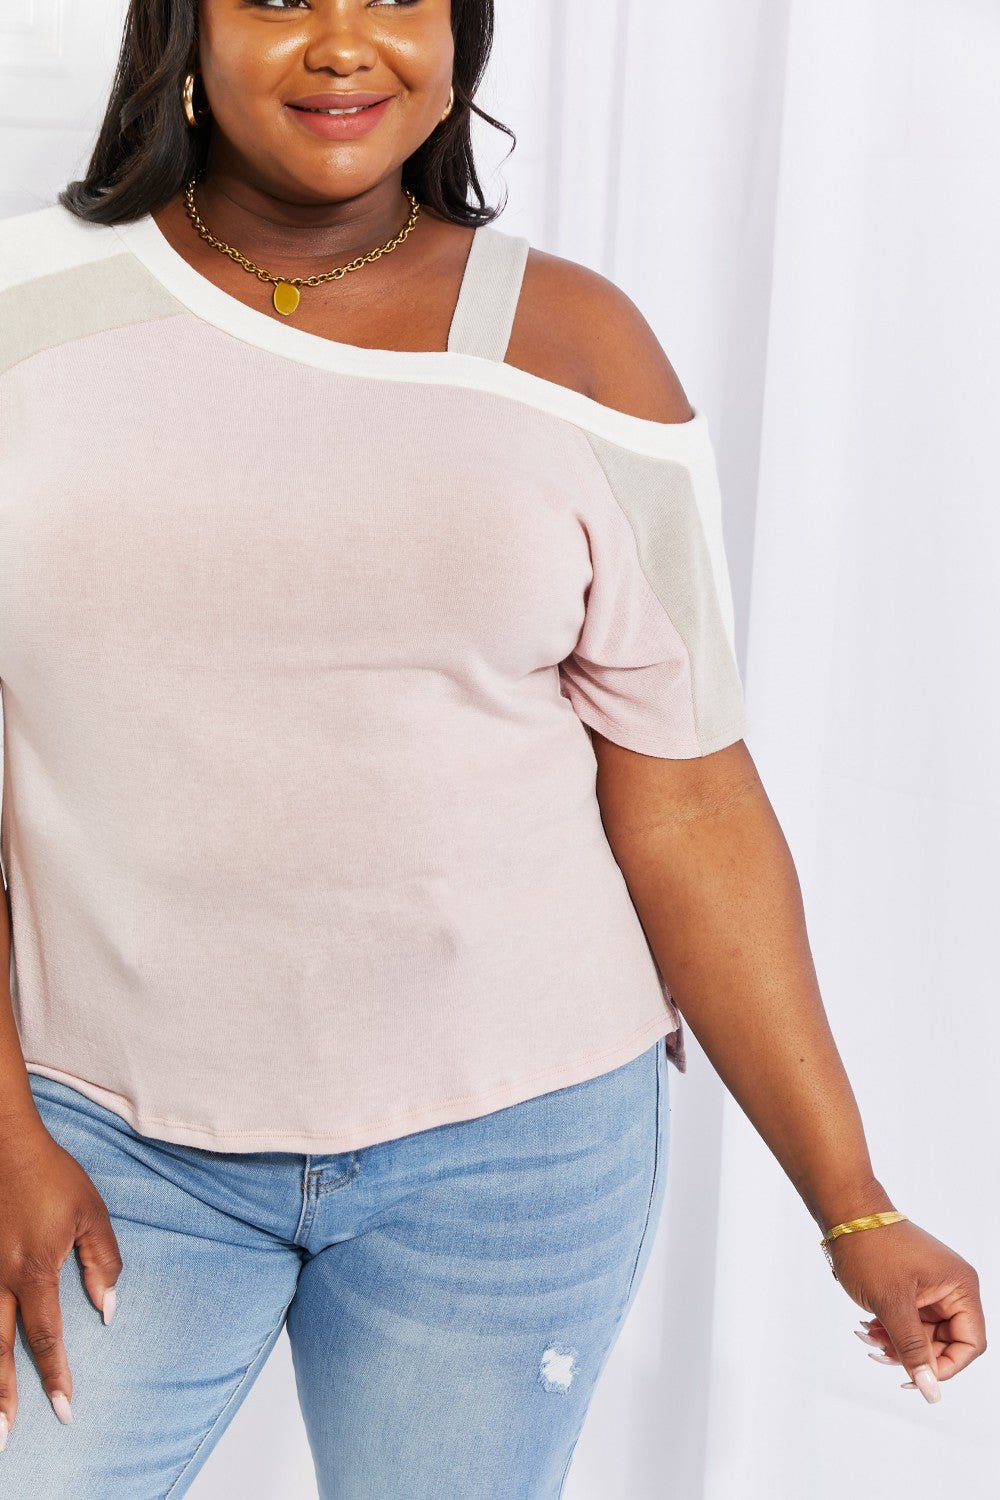 Cold Shoulder Tee in Dusty PinkT-ShirtAndree by Unit